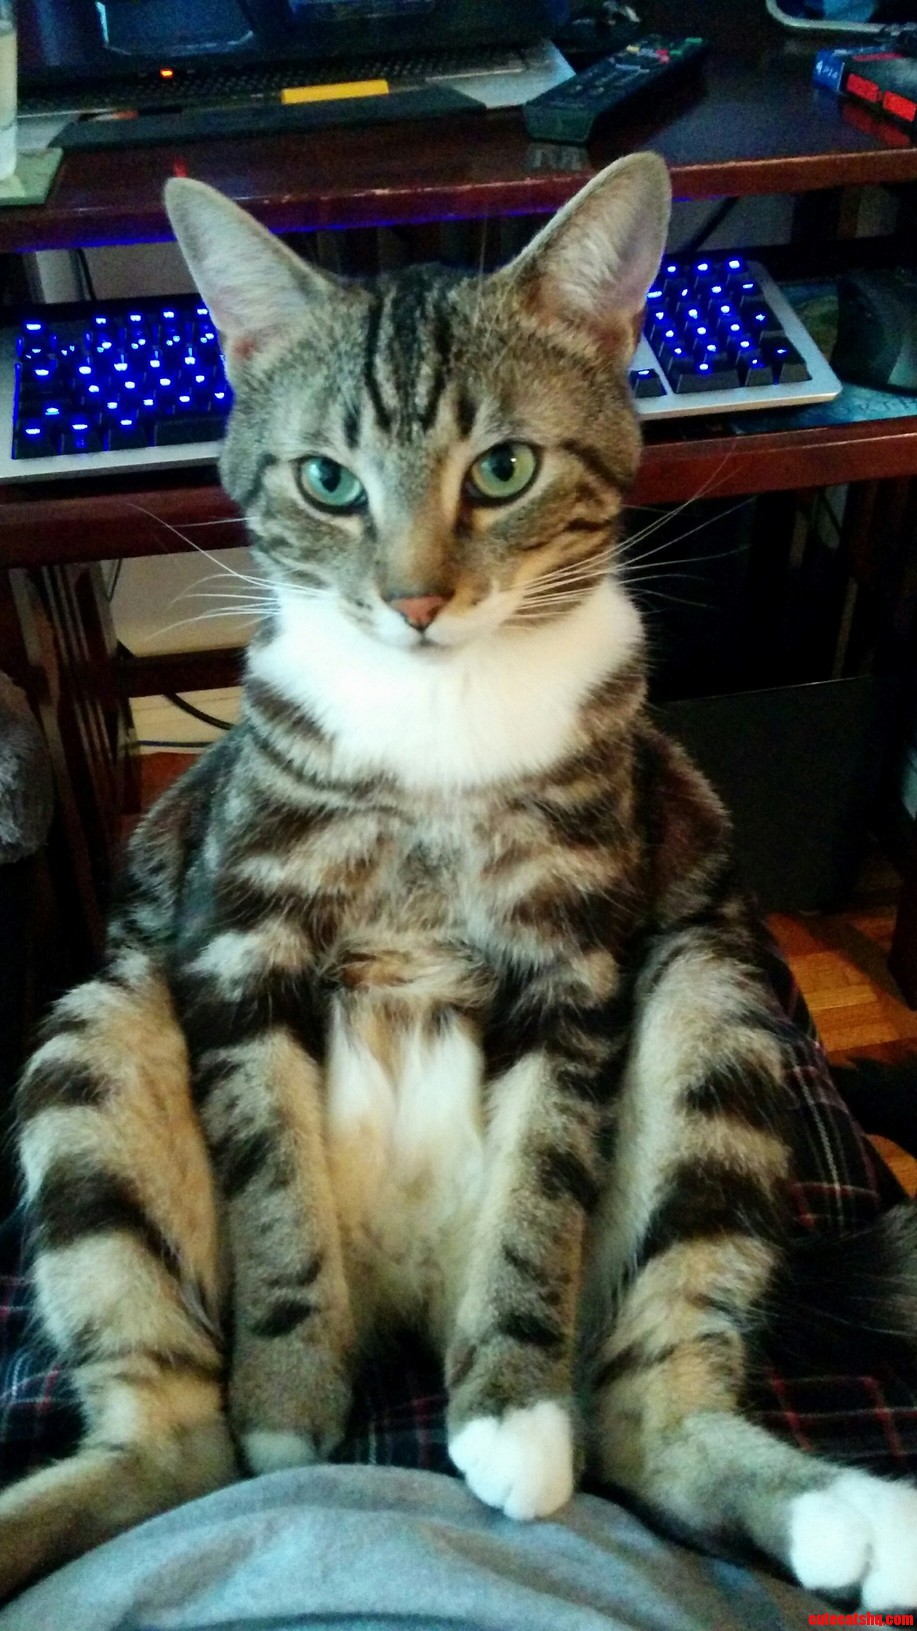 This is how my cat decided to sit on my lap.